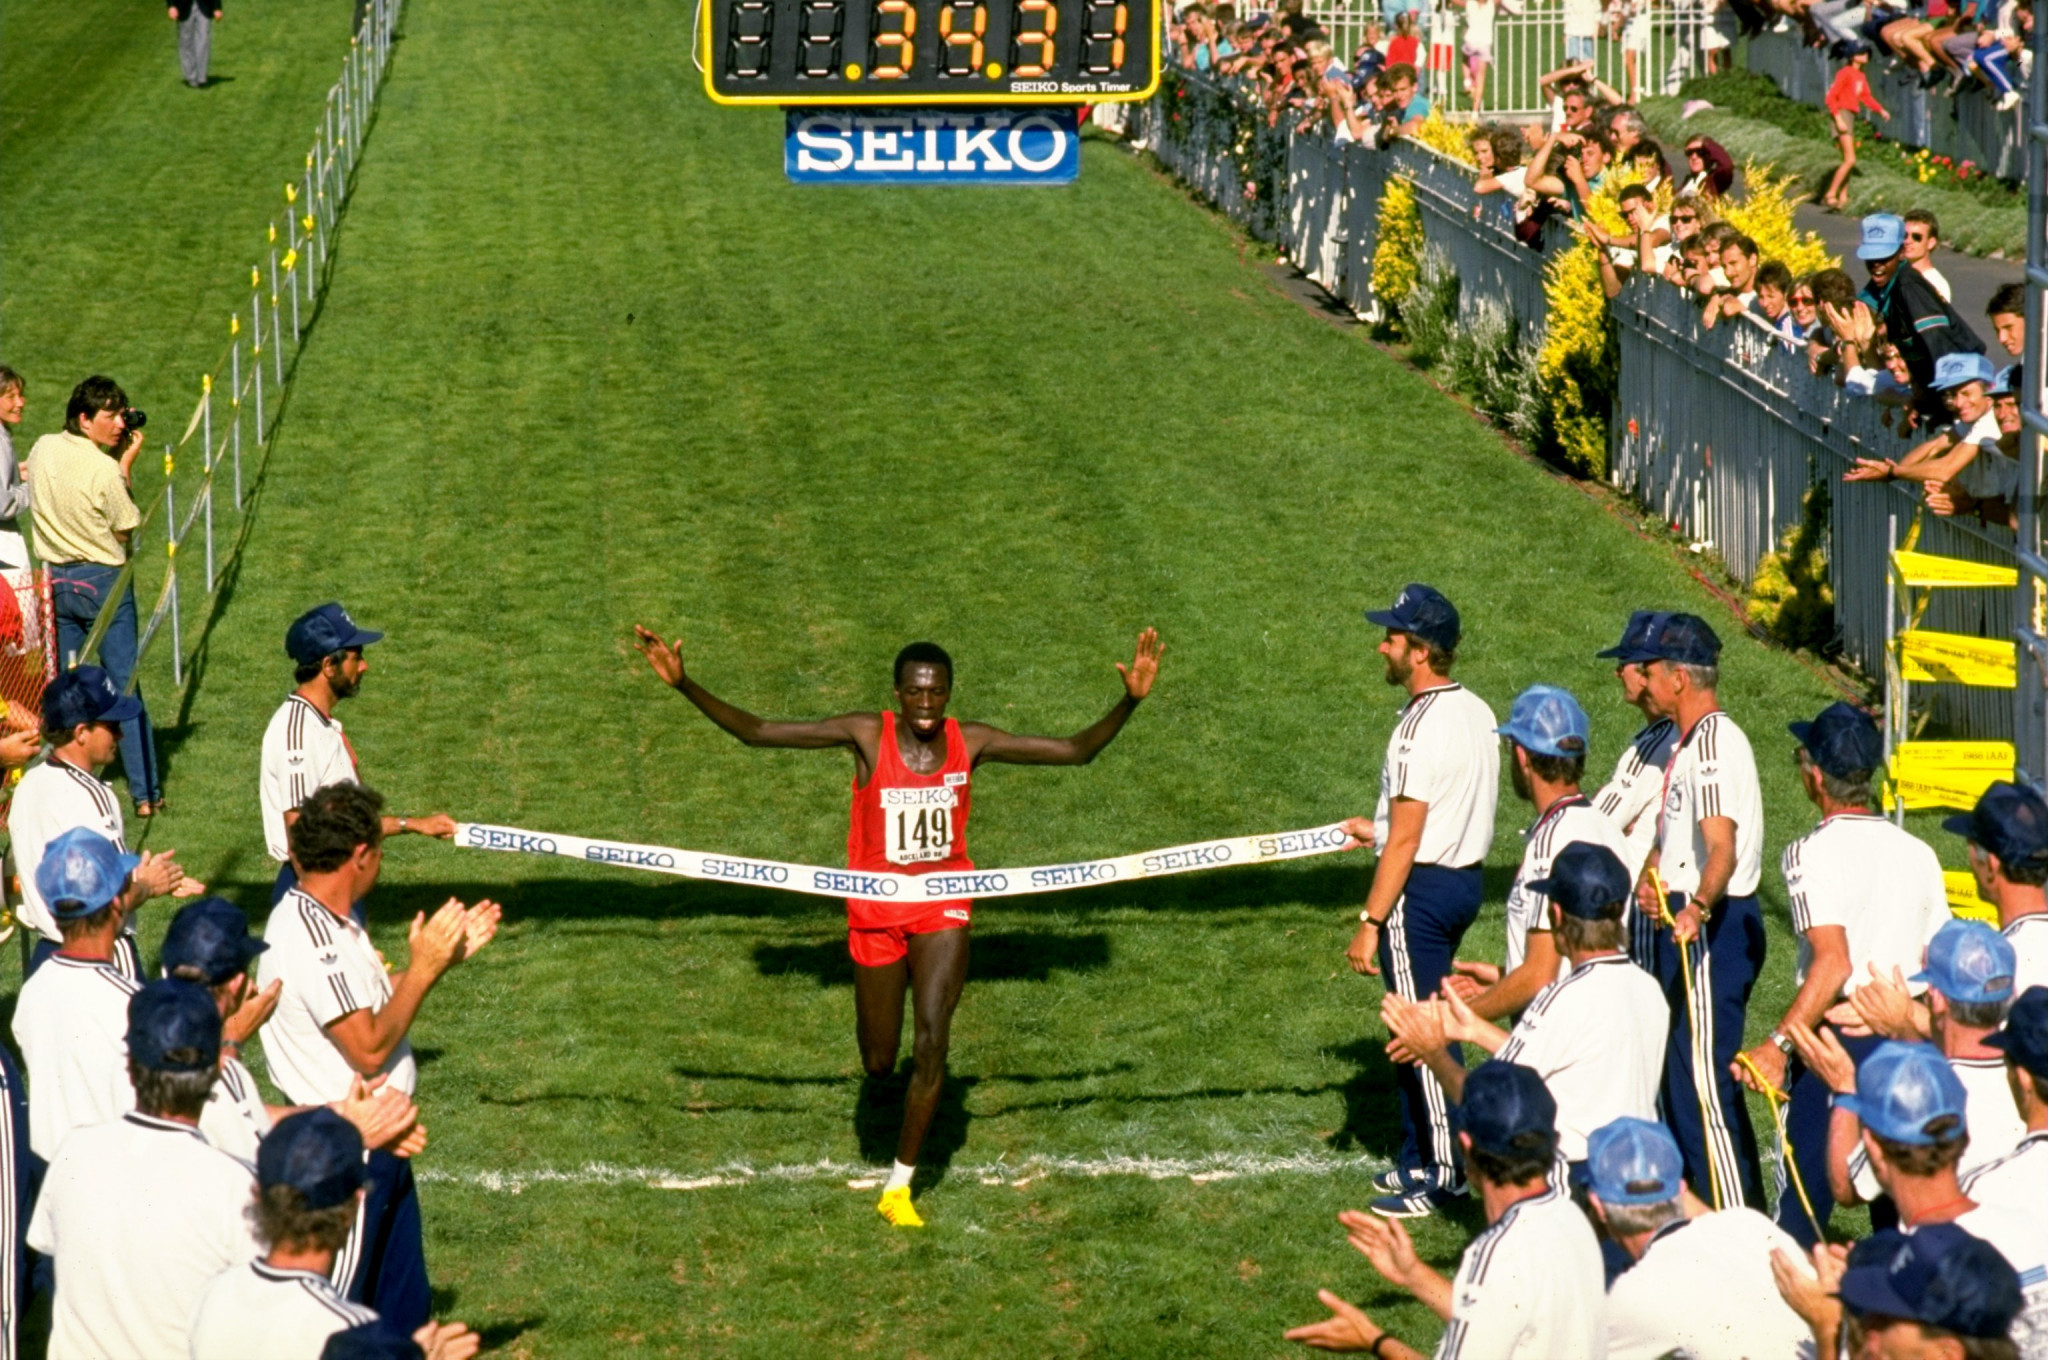 The only other time the IAAF World Cross Country Championships have taken place in Oceania was in Auckland in 1988 when the men's race was won by Kenya's John Ngugi ©Getty Images